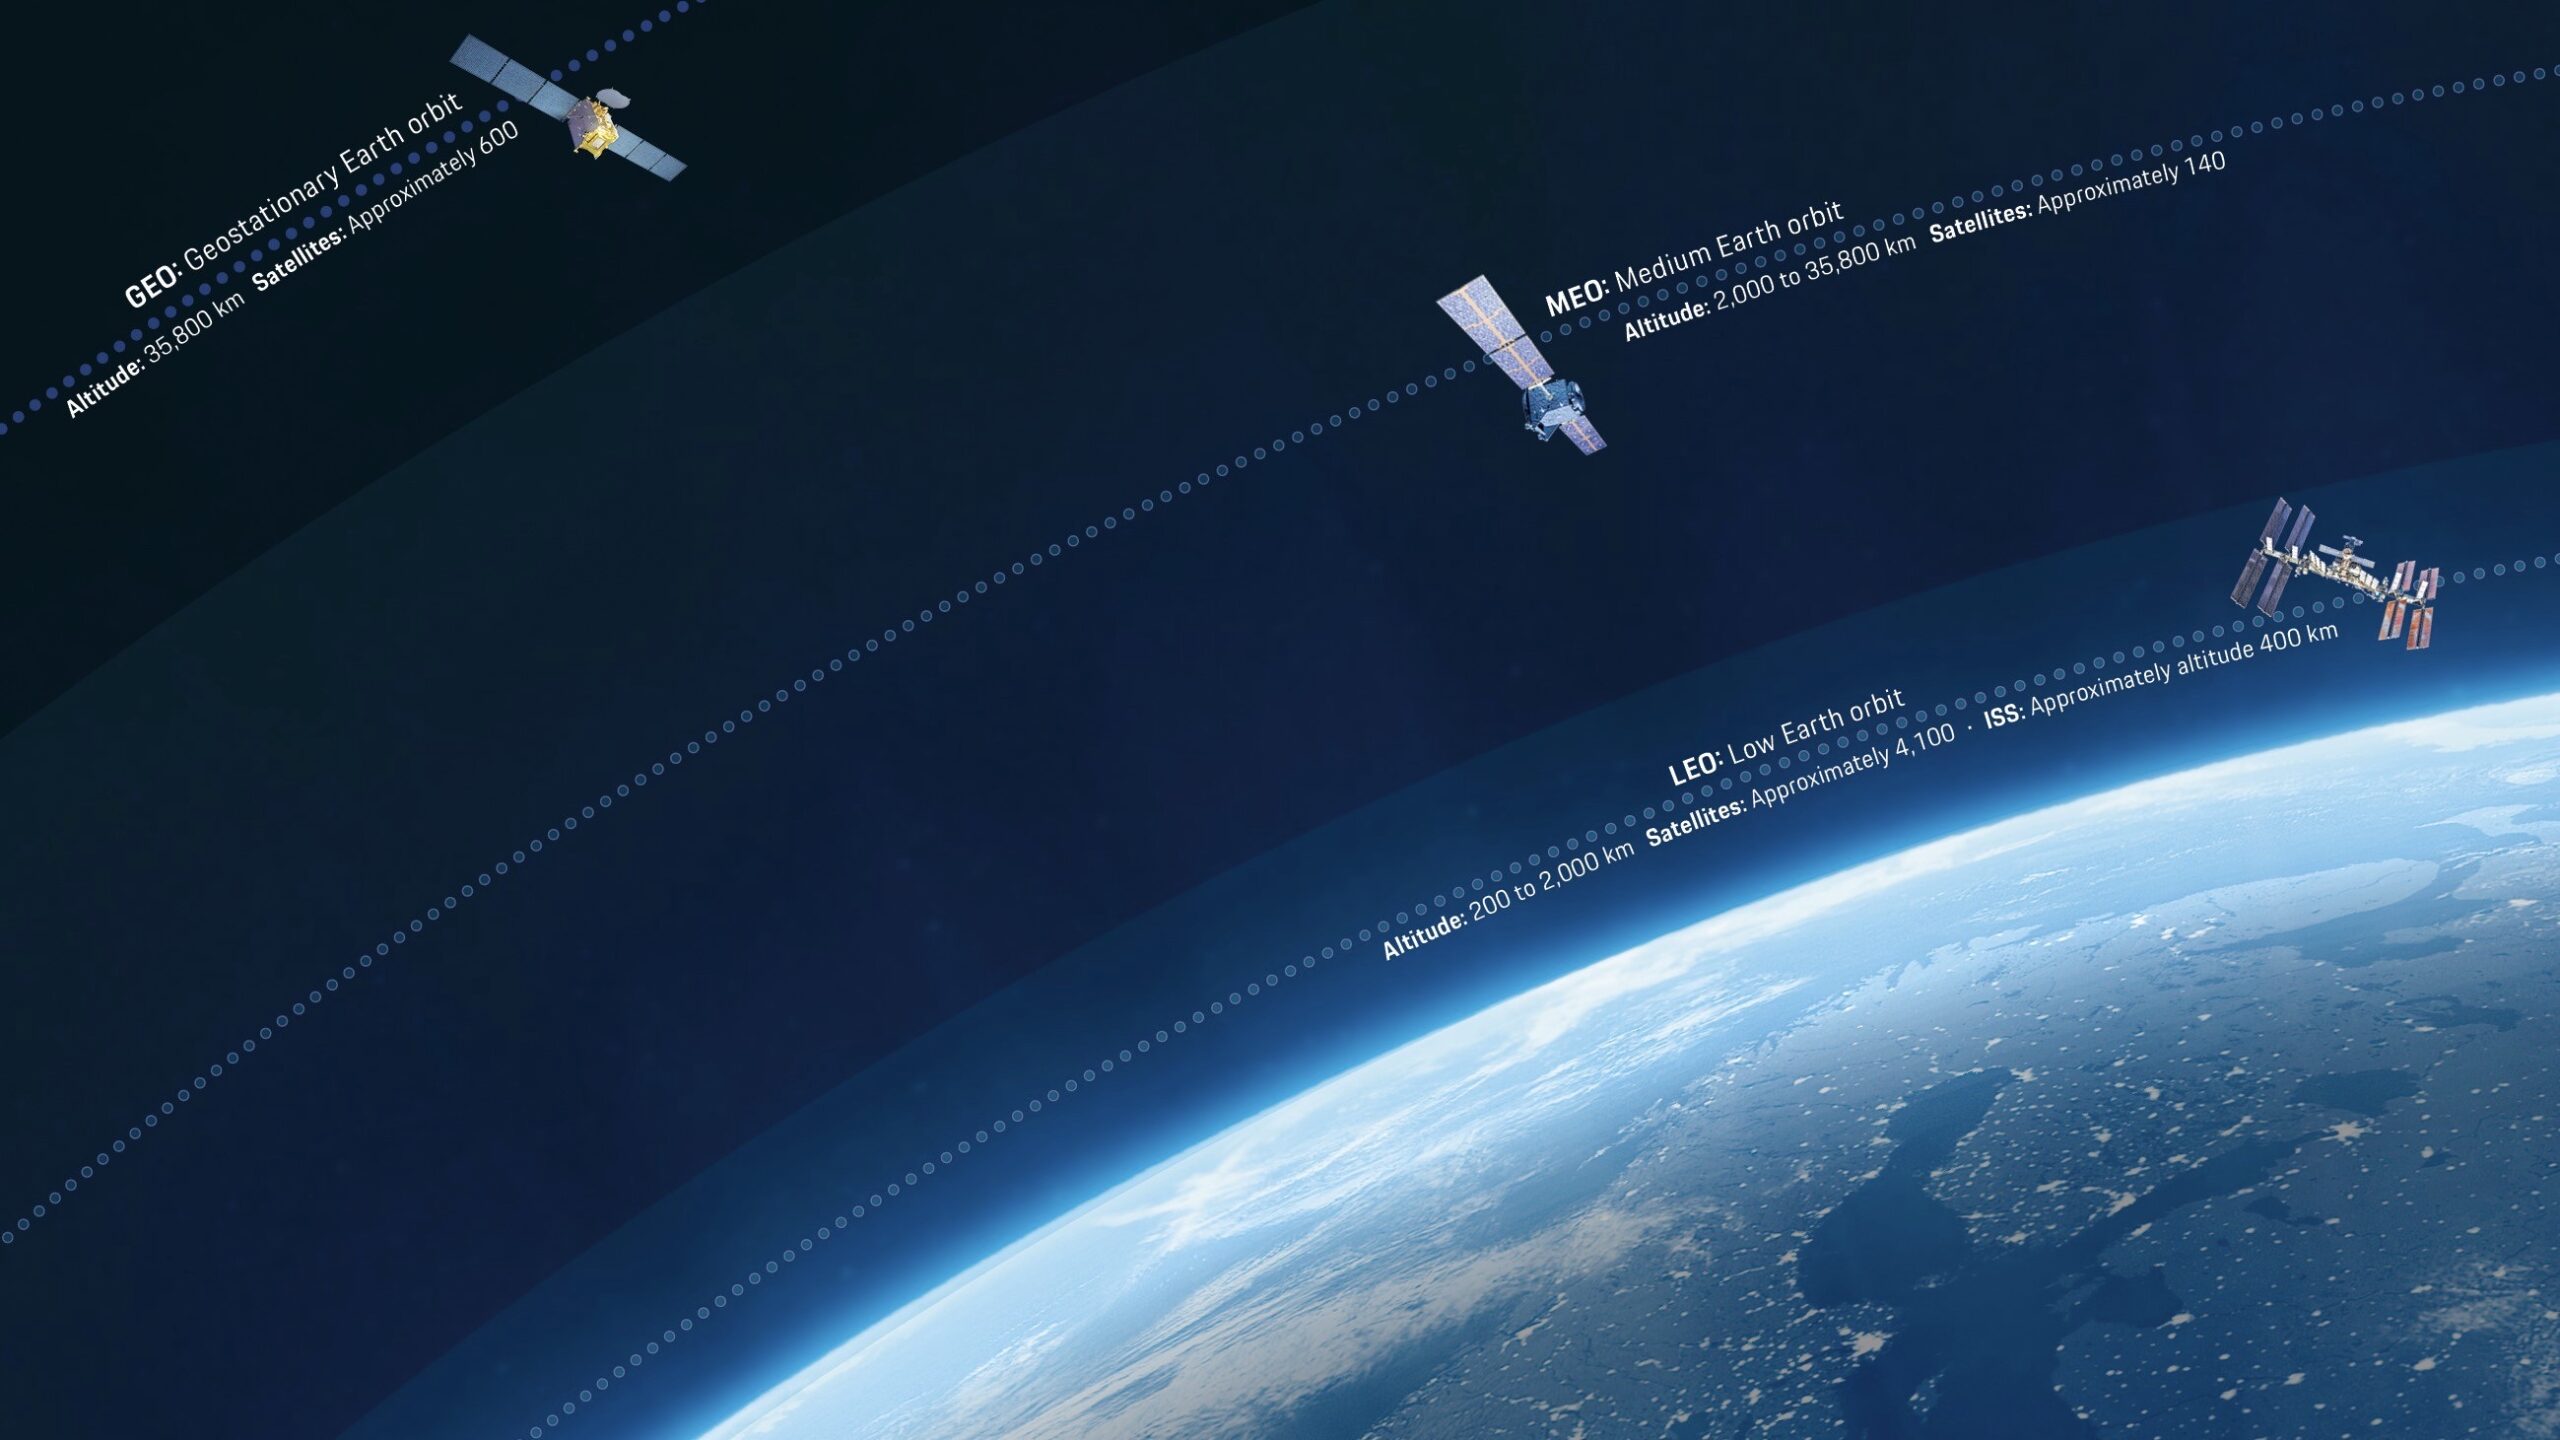 The importance of Satellites and Vehicles of the Future